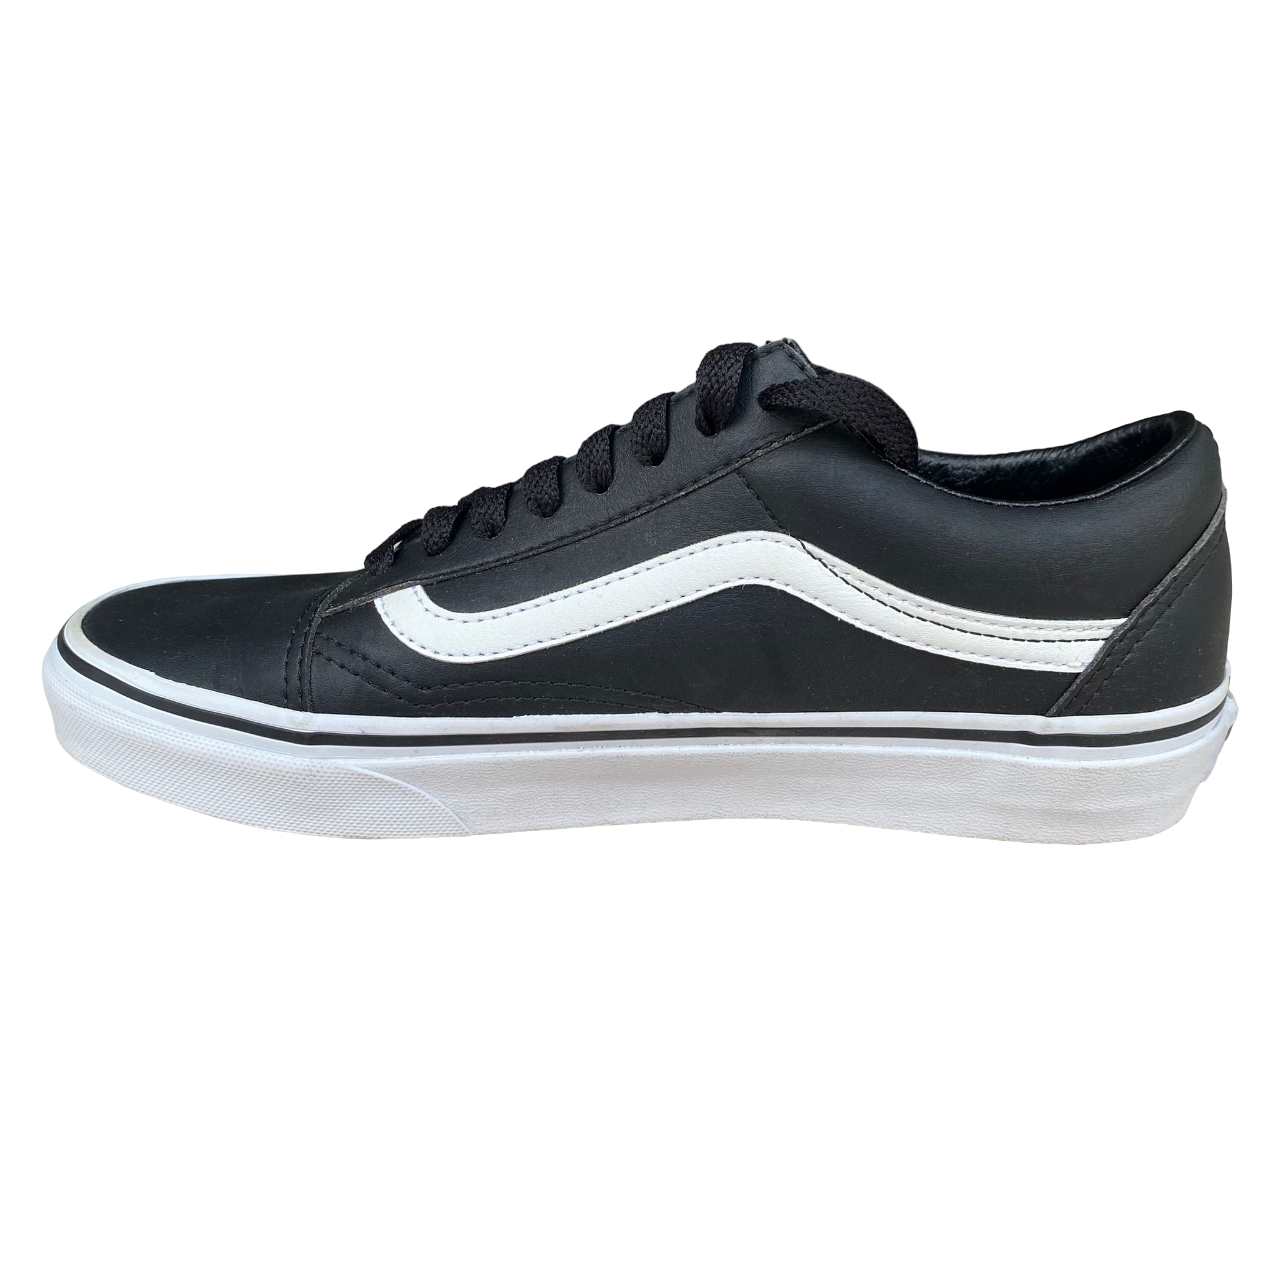 Vans Old Skool adult sneakers shoe in leather VN0A38G1NQR black-white